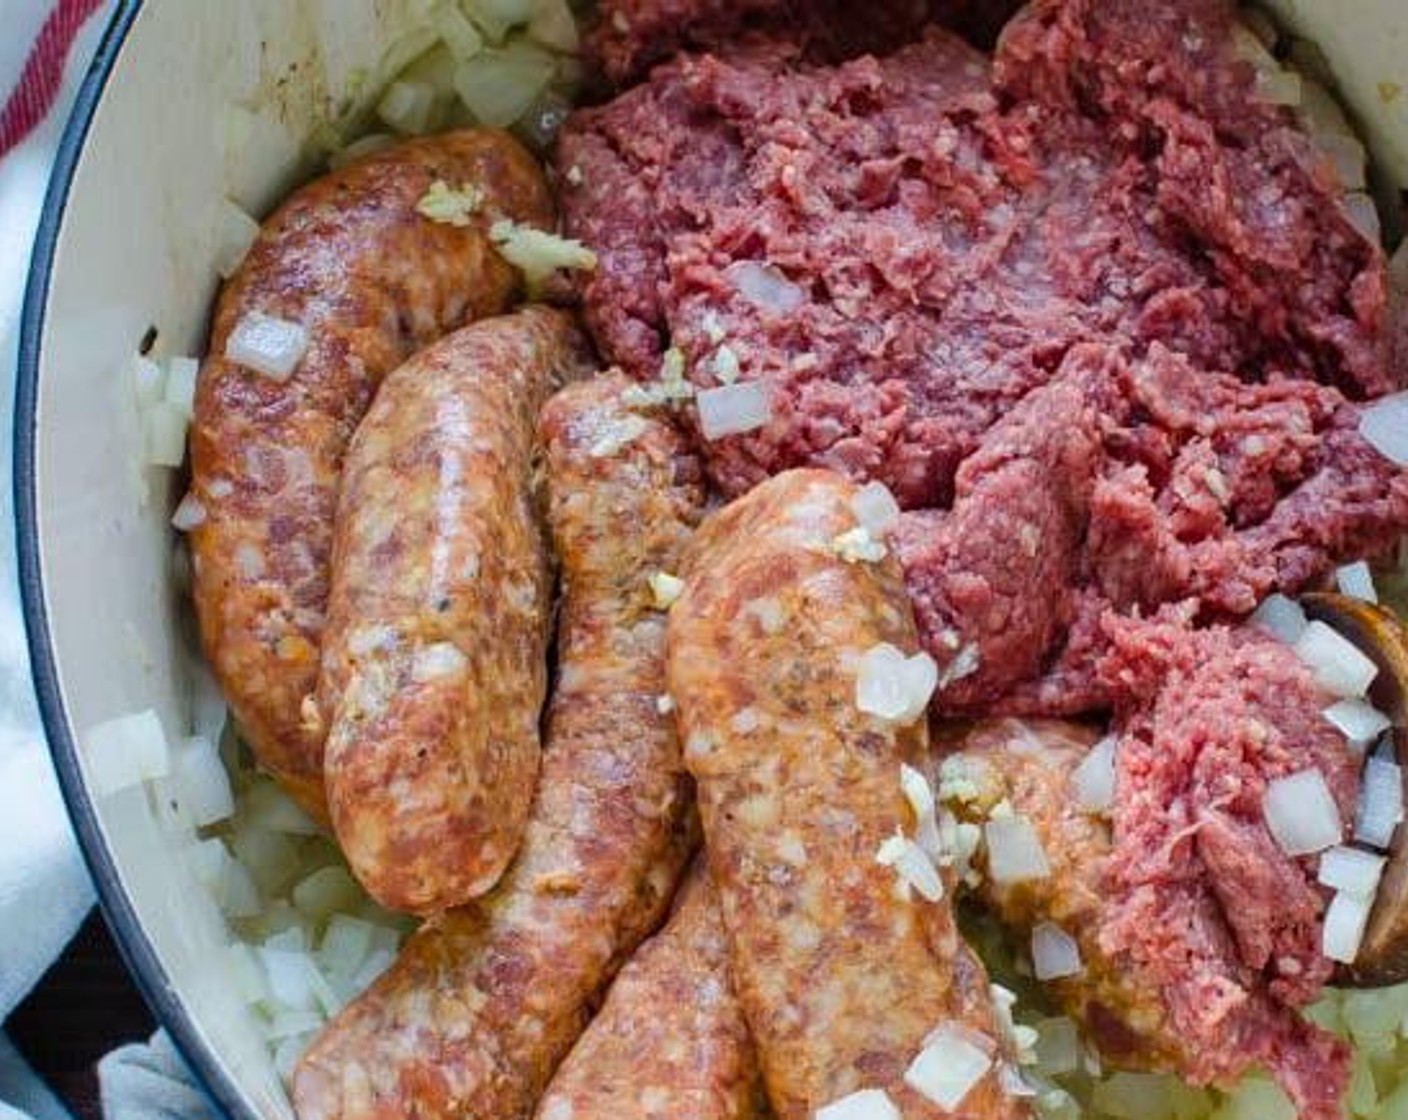 step 2 In a dutch oven, heat Olive Oil (1 Tbsp) over medium heat. Add the chopped onion and sauté for 3-4 minutes, until translucent. Add Italian sausage and Extra Lean Ground Beef (1 lb) and break meat apart using a wooden spoon or fork.